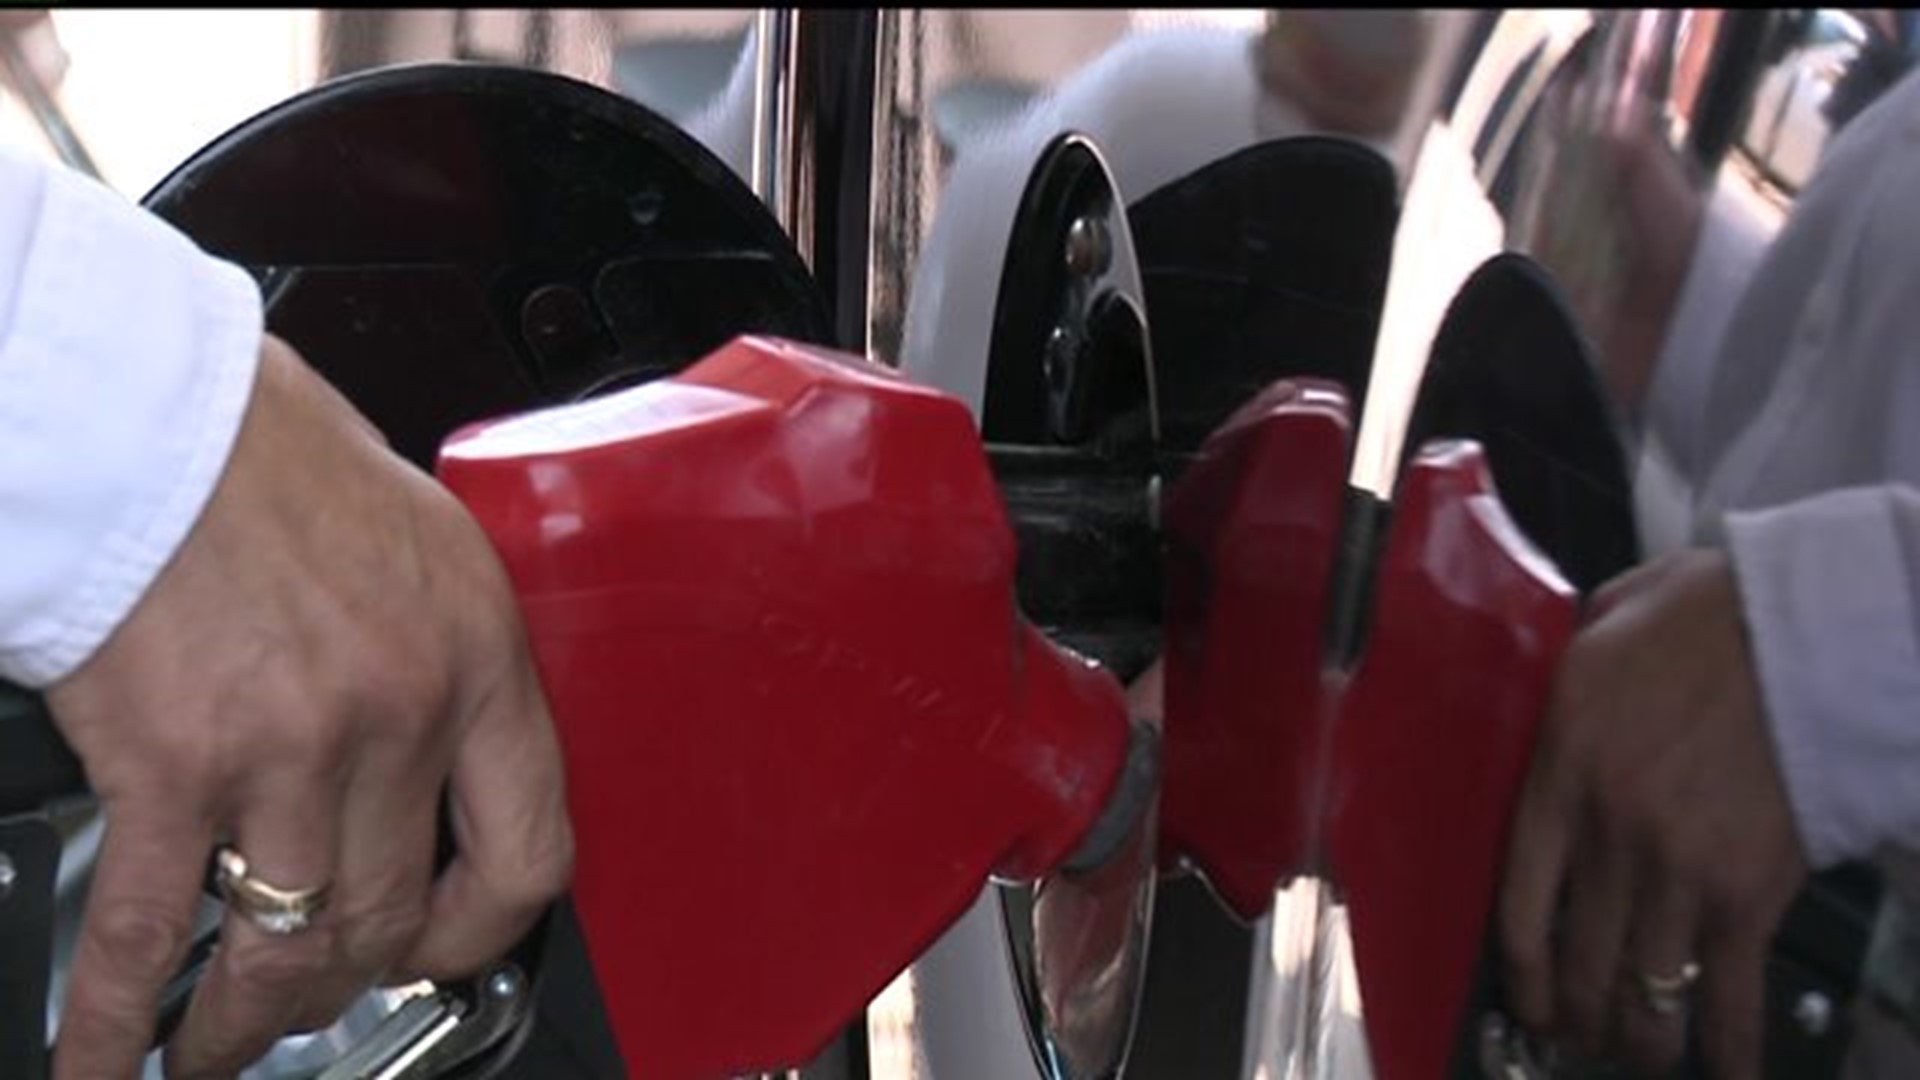 Bill aims to help disabled travelers at the gas pump